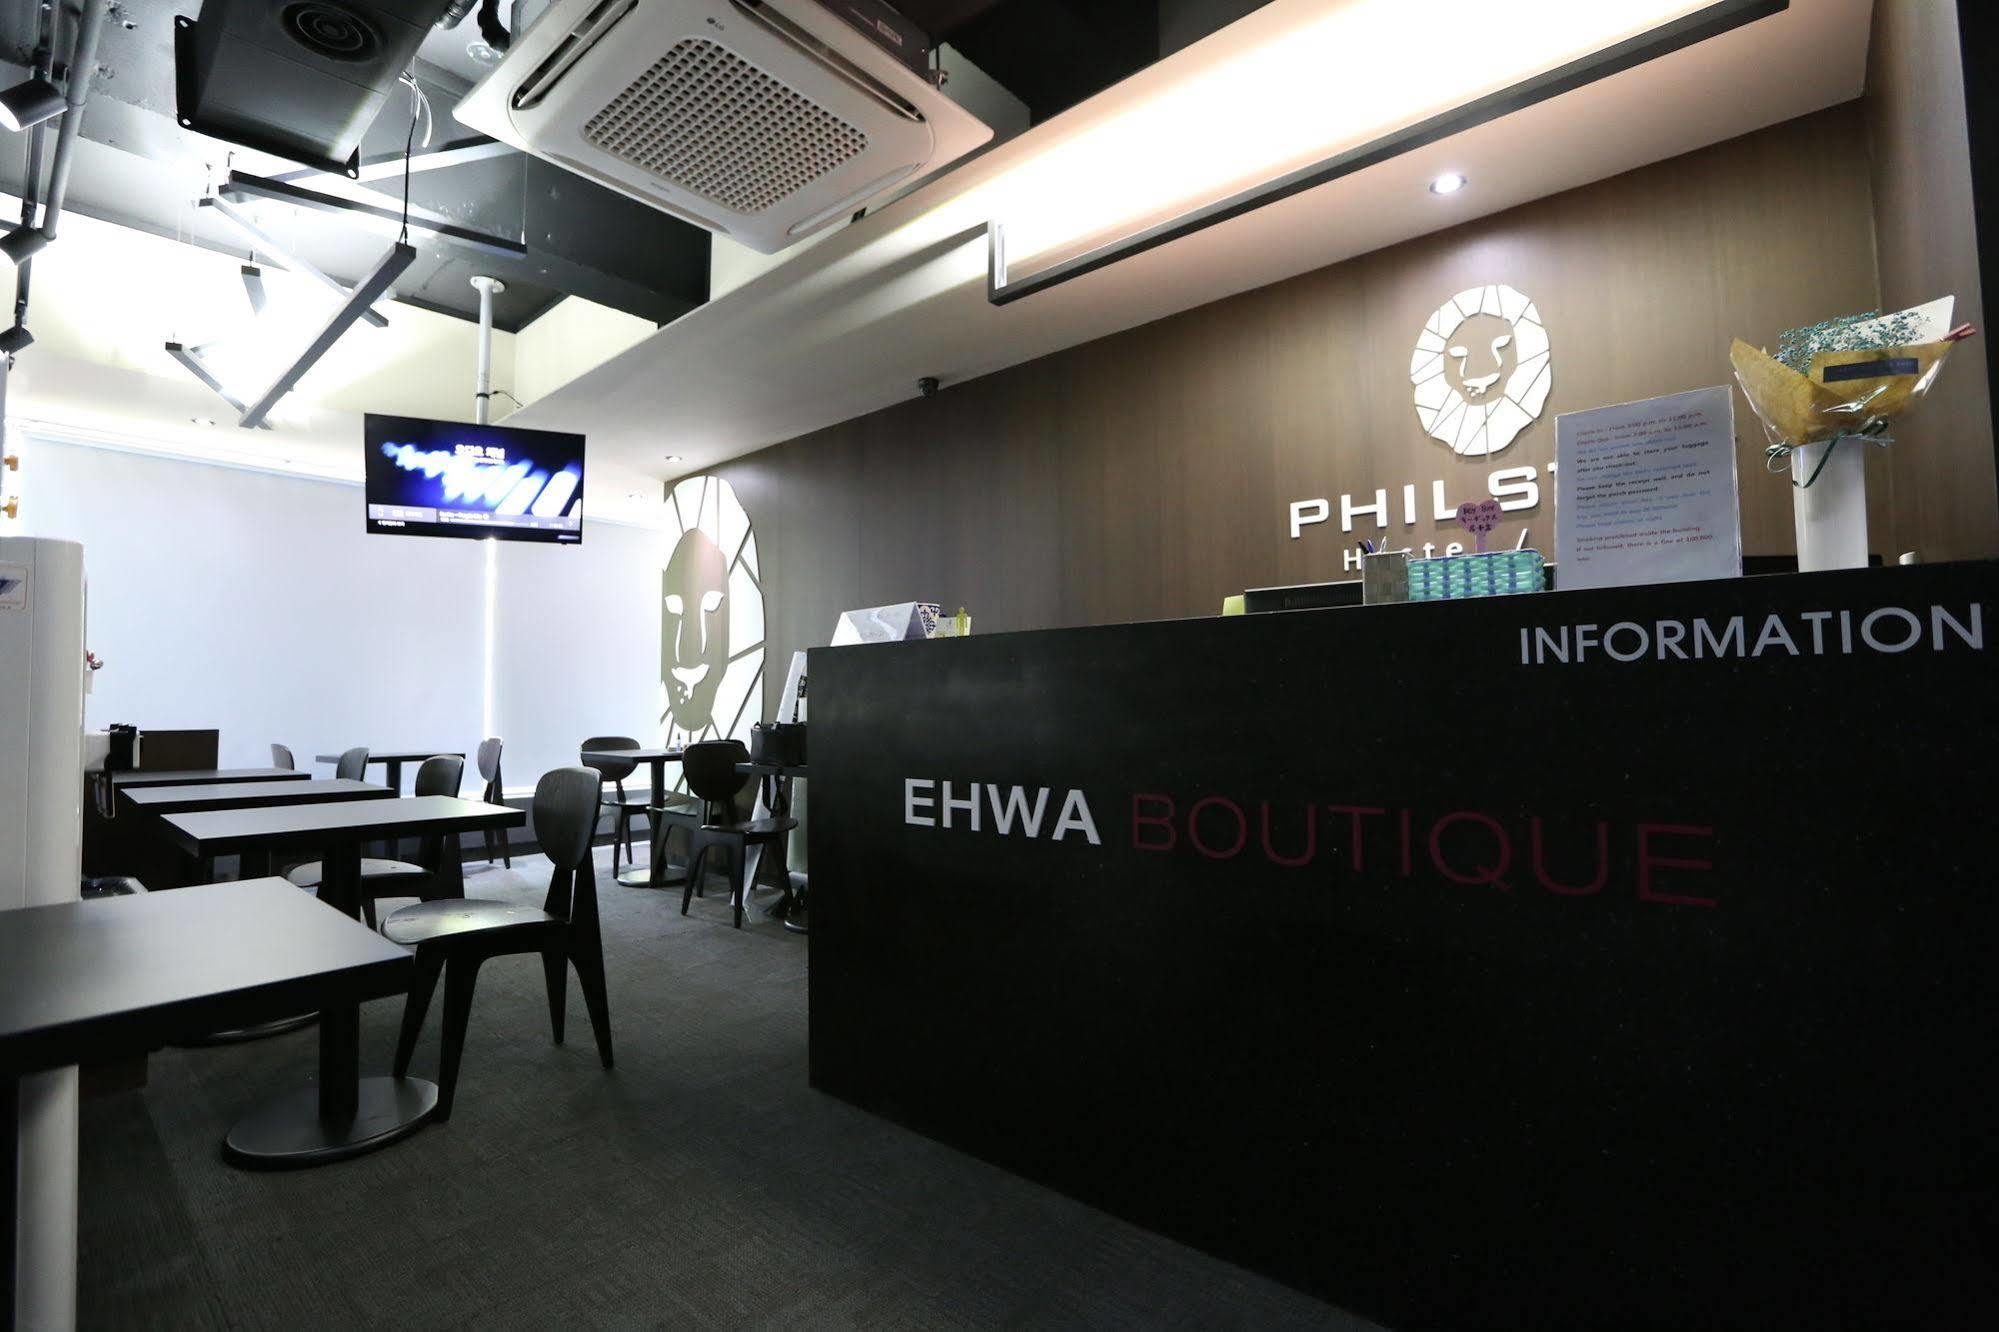 Philstay Ehwa Boutique - Female Only Seul Esterno foto